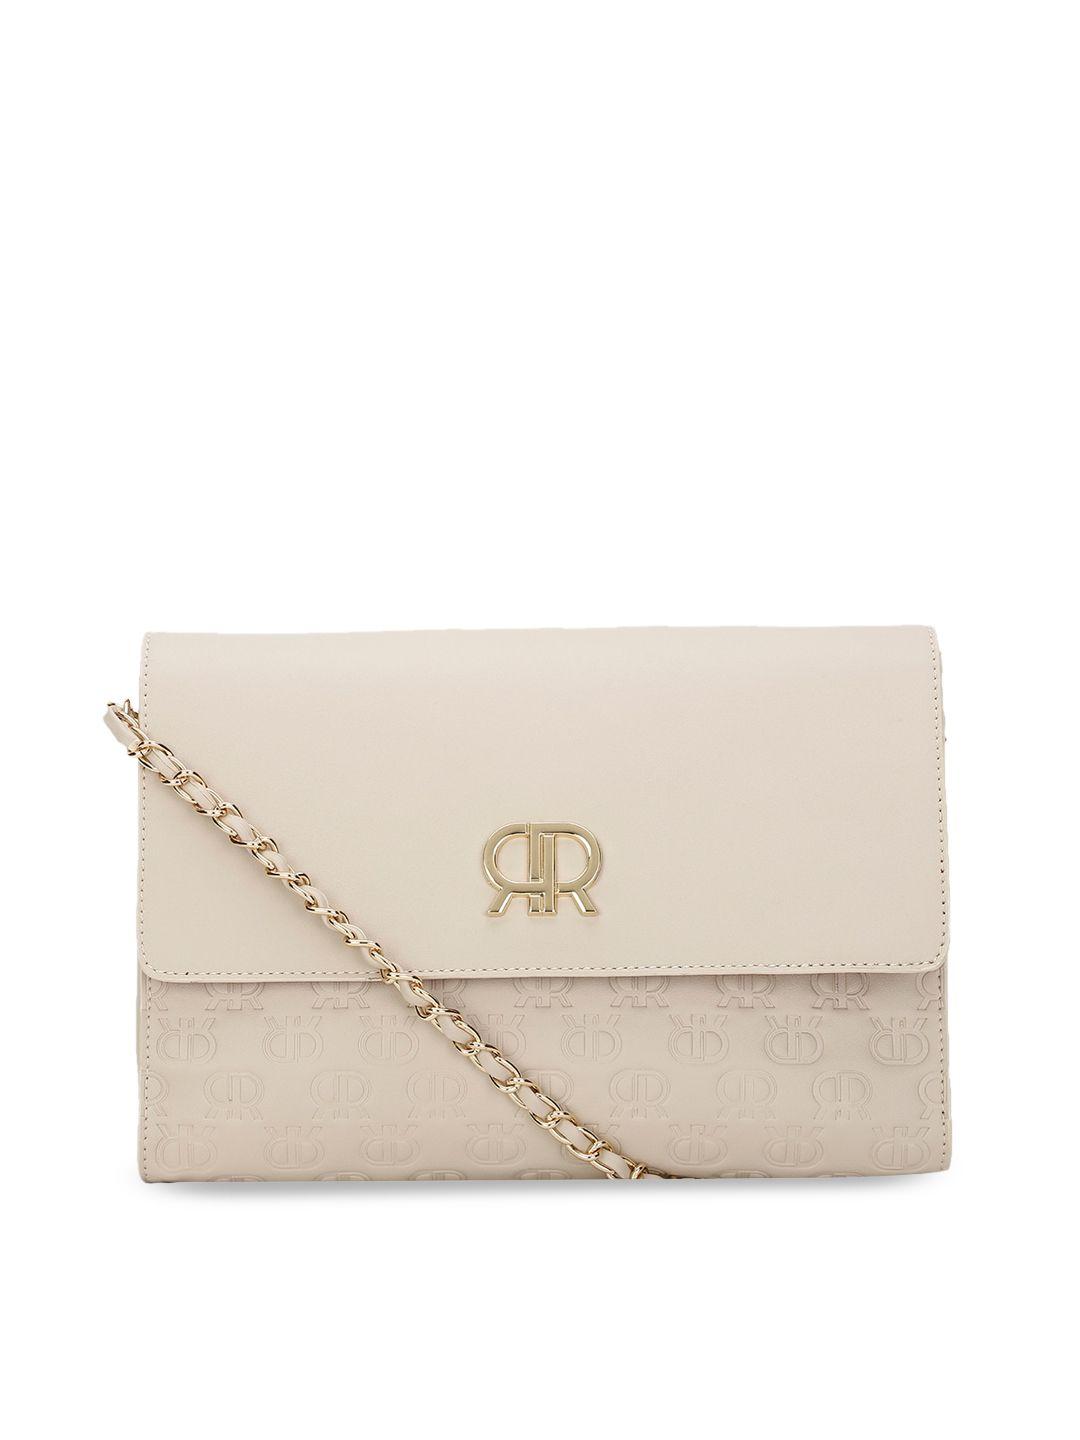 marie claire textured structured sling bag